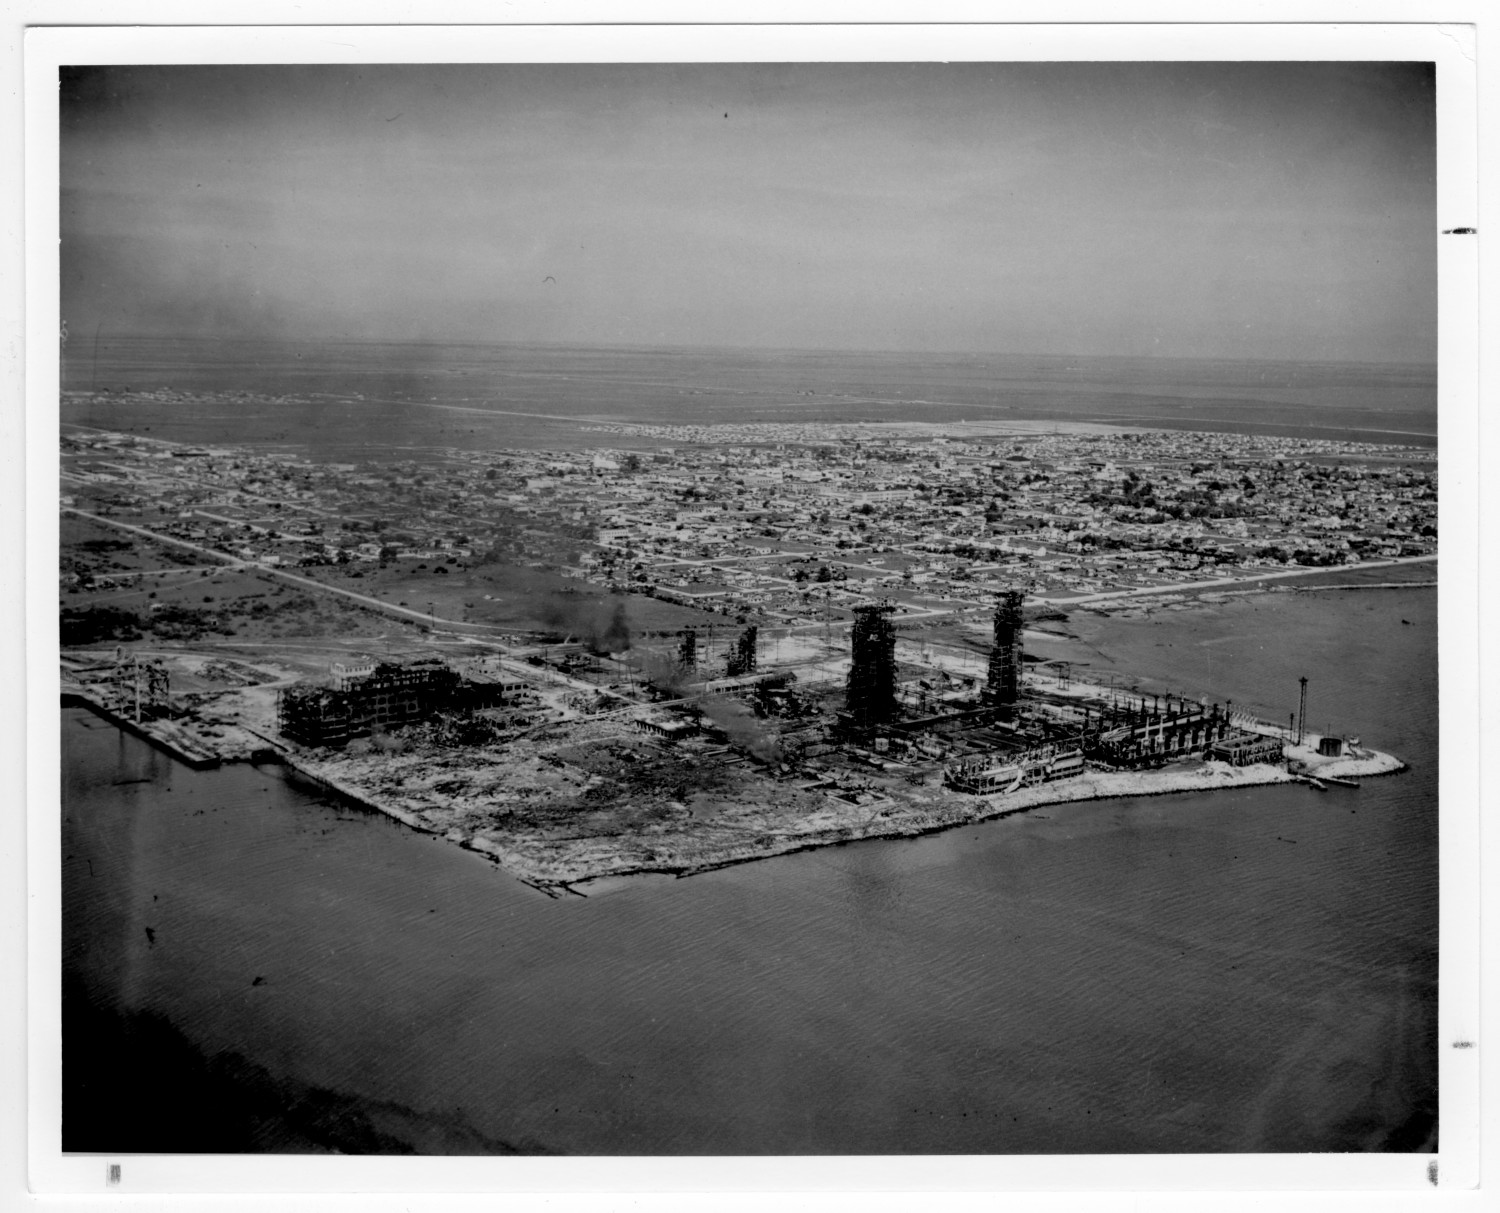 [Aerial view of refinery structures near the port after the 1947 Texas City Disaster ...1500 x 1213